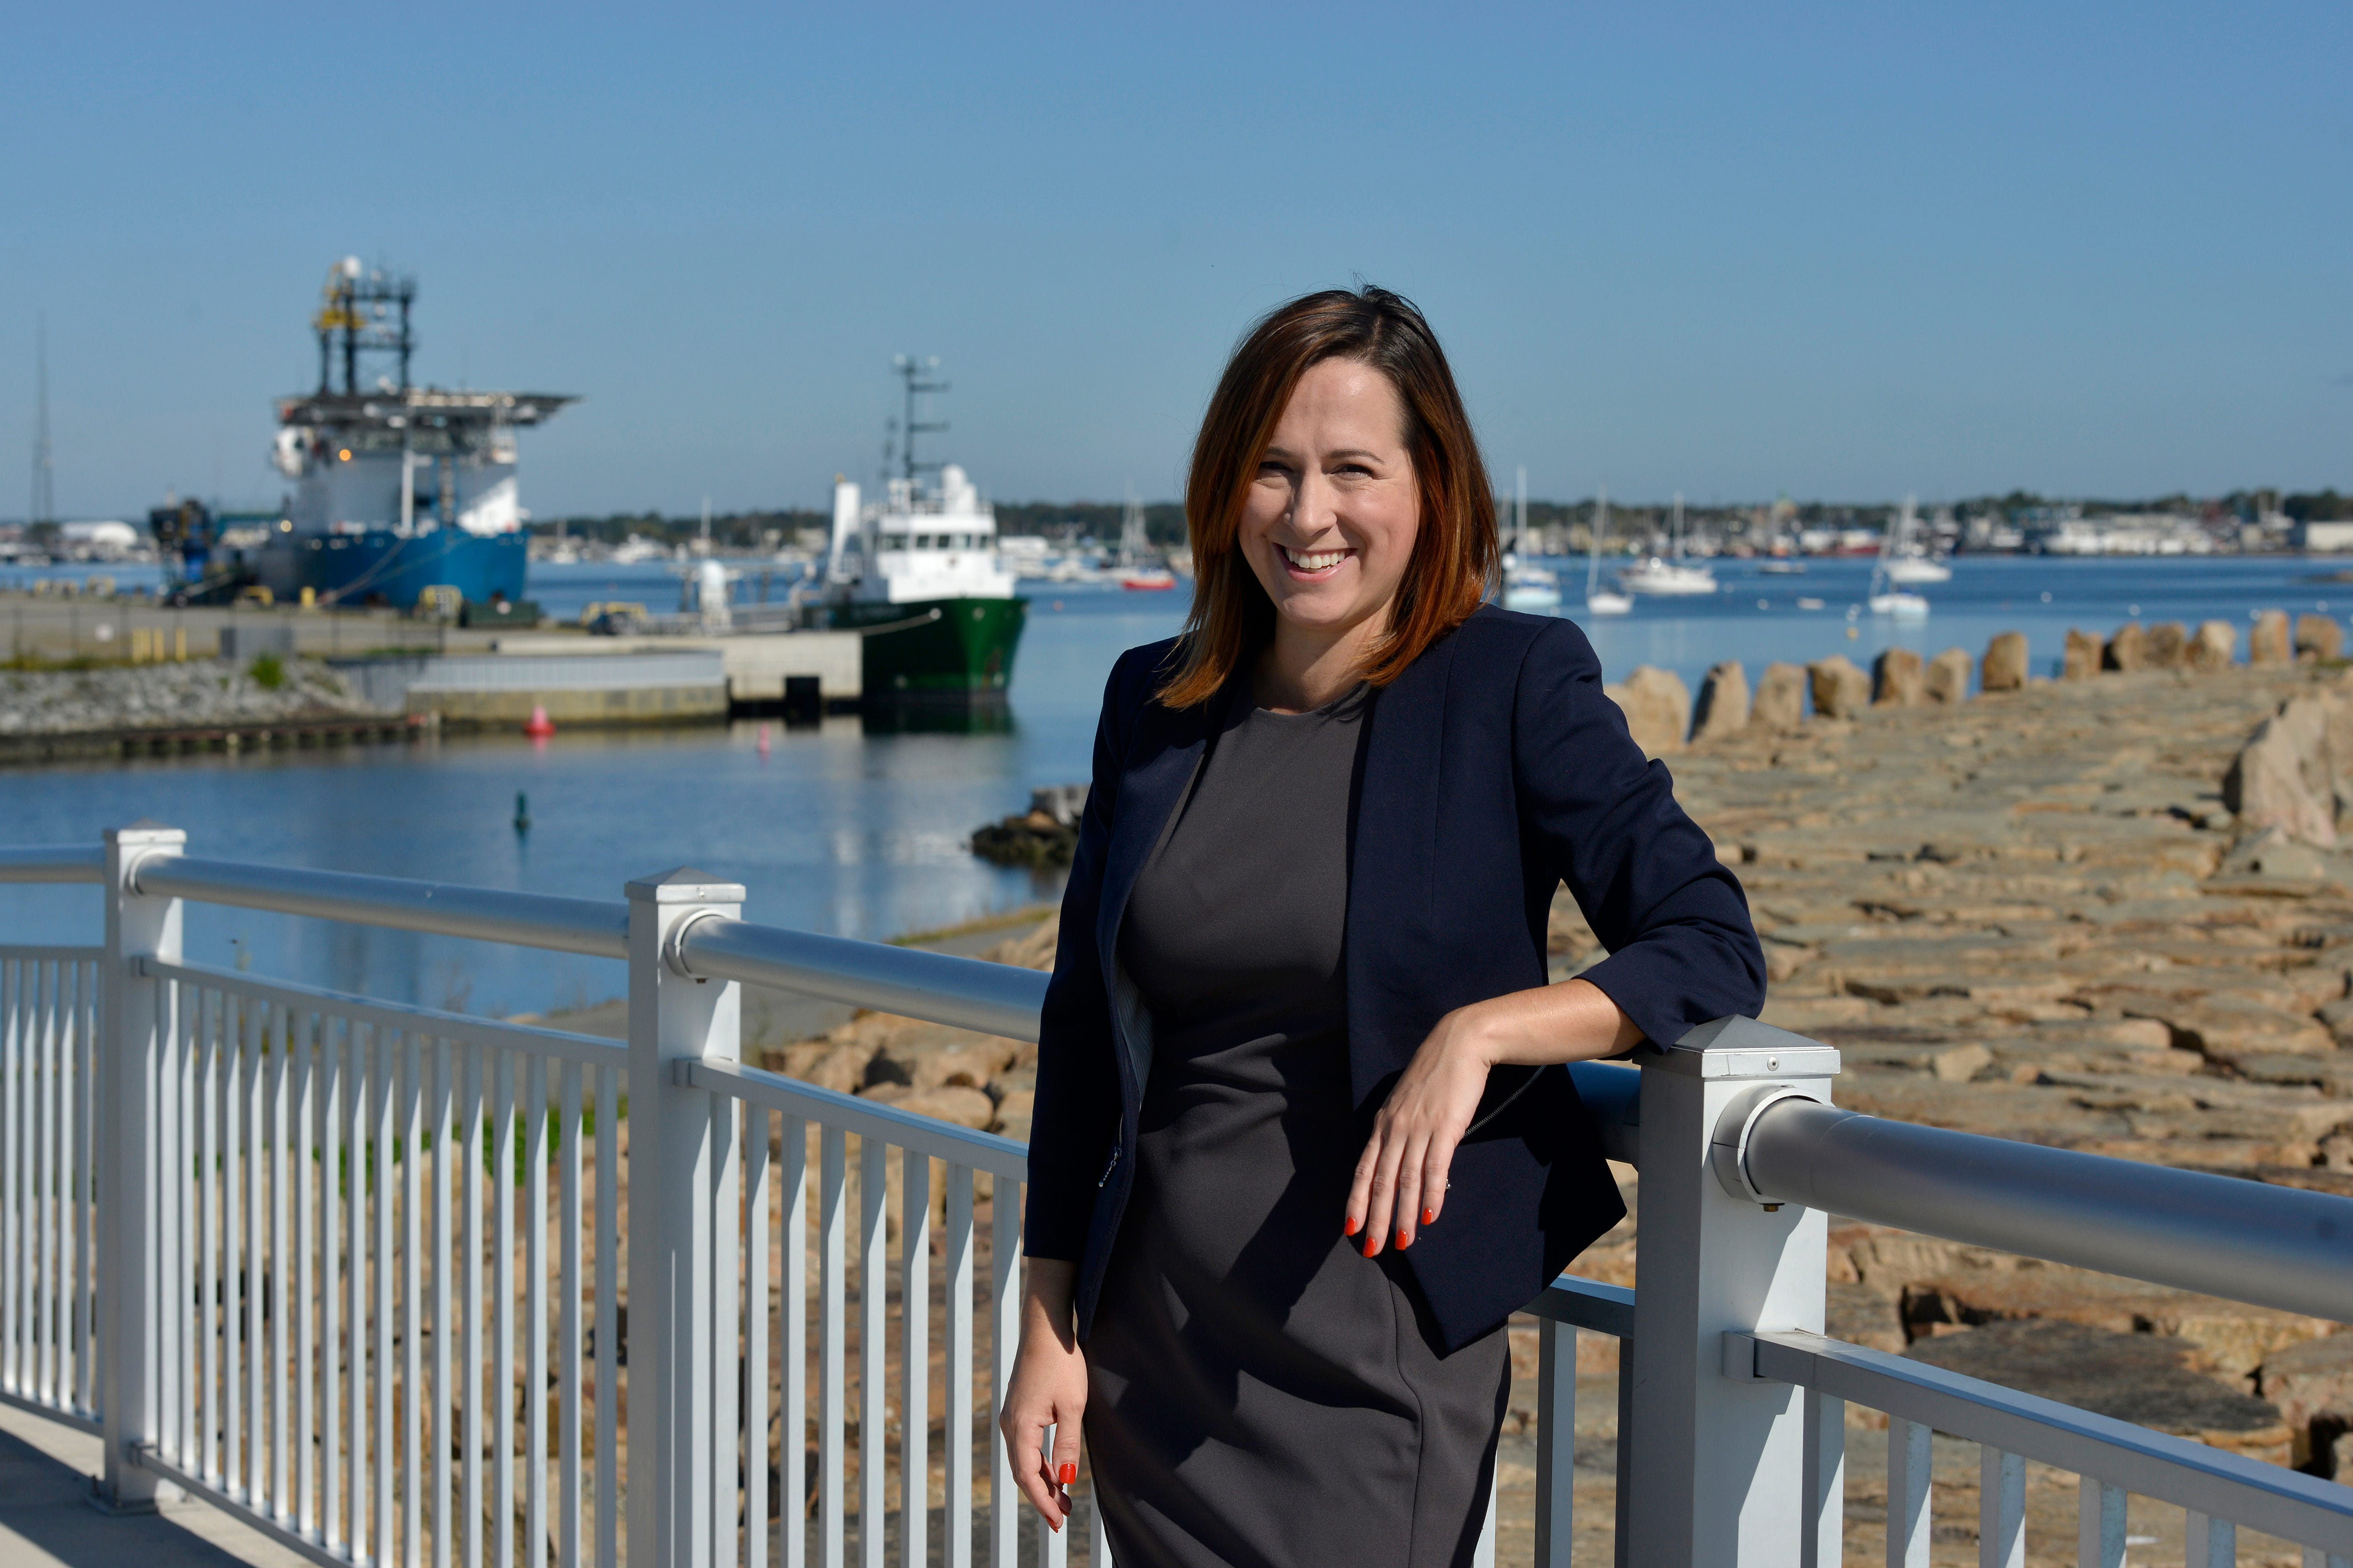 Elise Rapoza, assistant director of corporate engagement at the University of Massachusetts-Dartmouth, stands at the New Bedford Marine Commerce Terminal on Oct. 13, 2021. The terminal will be used as an onshore support facility for the construction, maintenance and operation of offshore wind farms that will be built south of Martha's Vineyard.